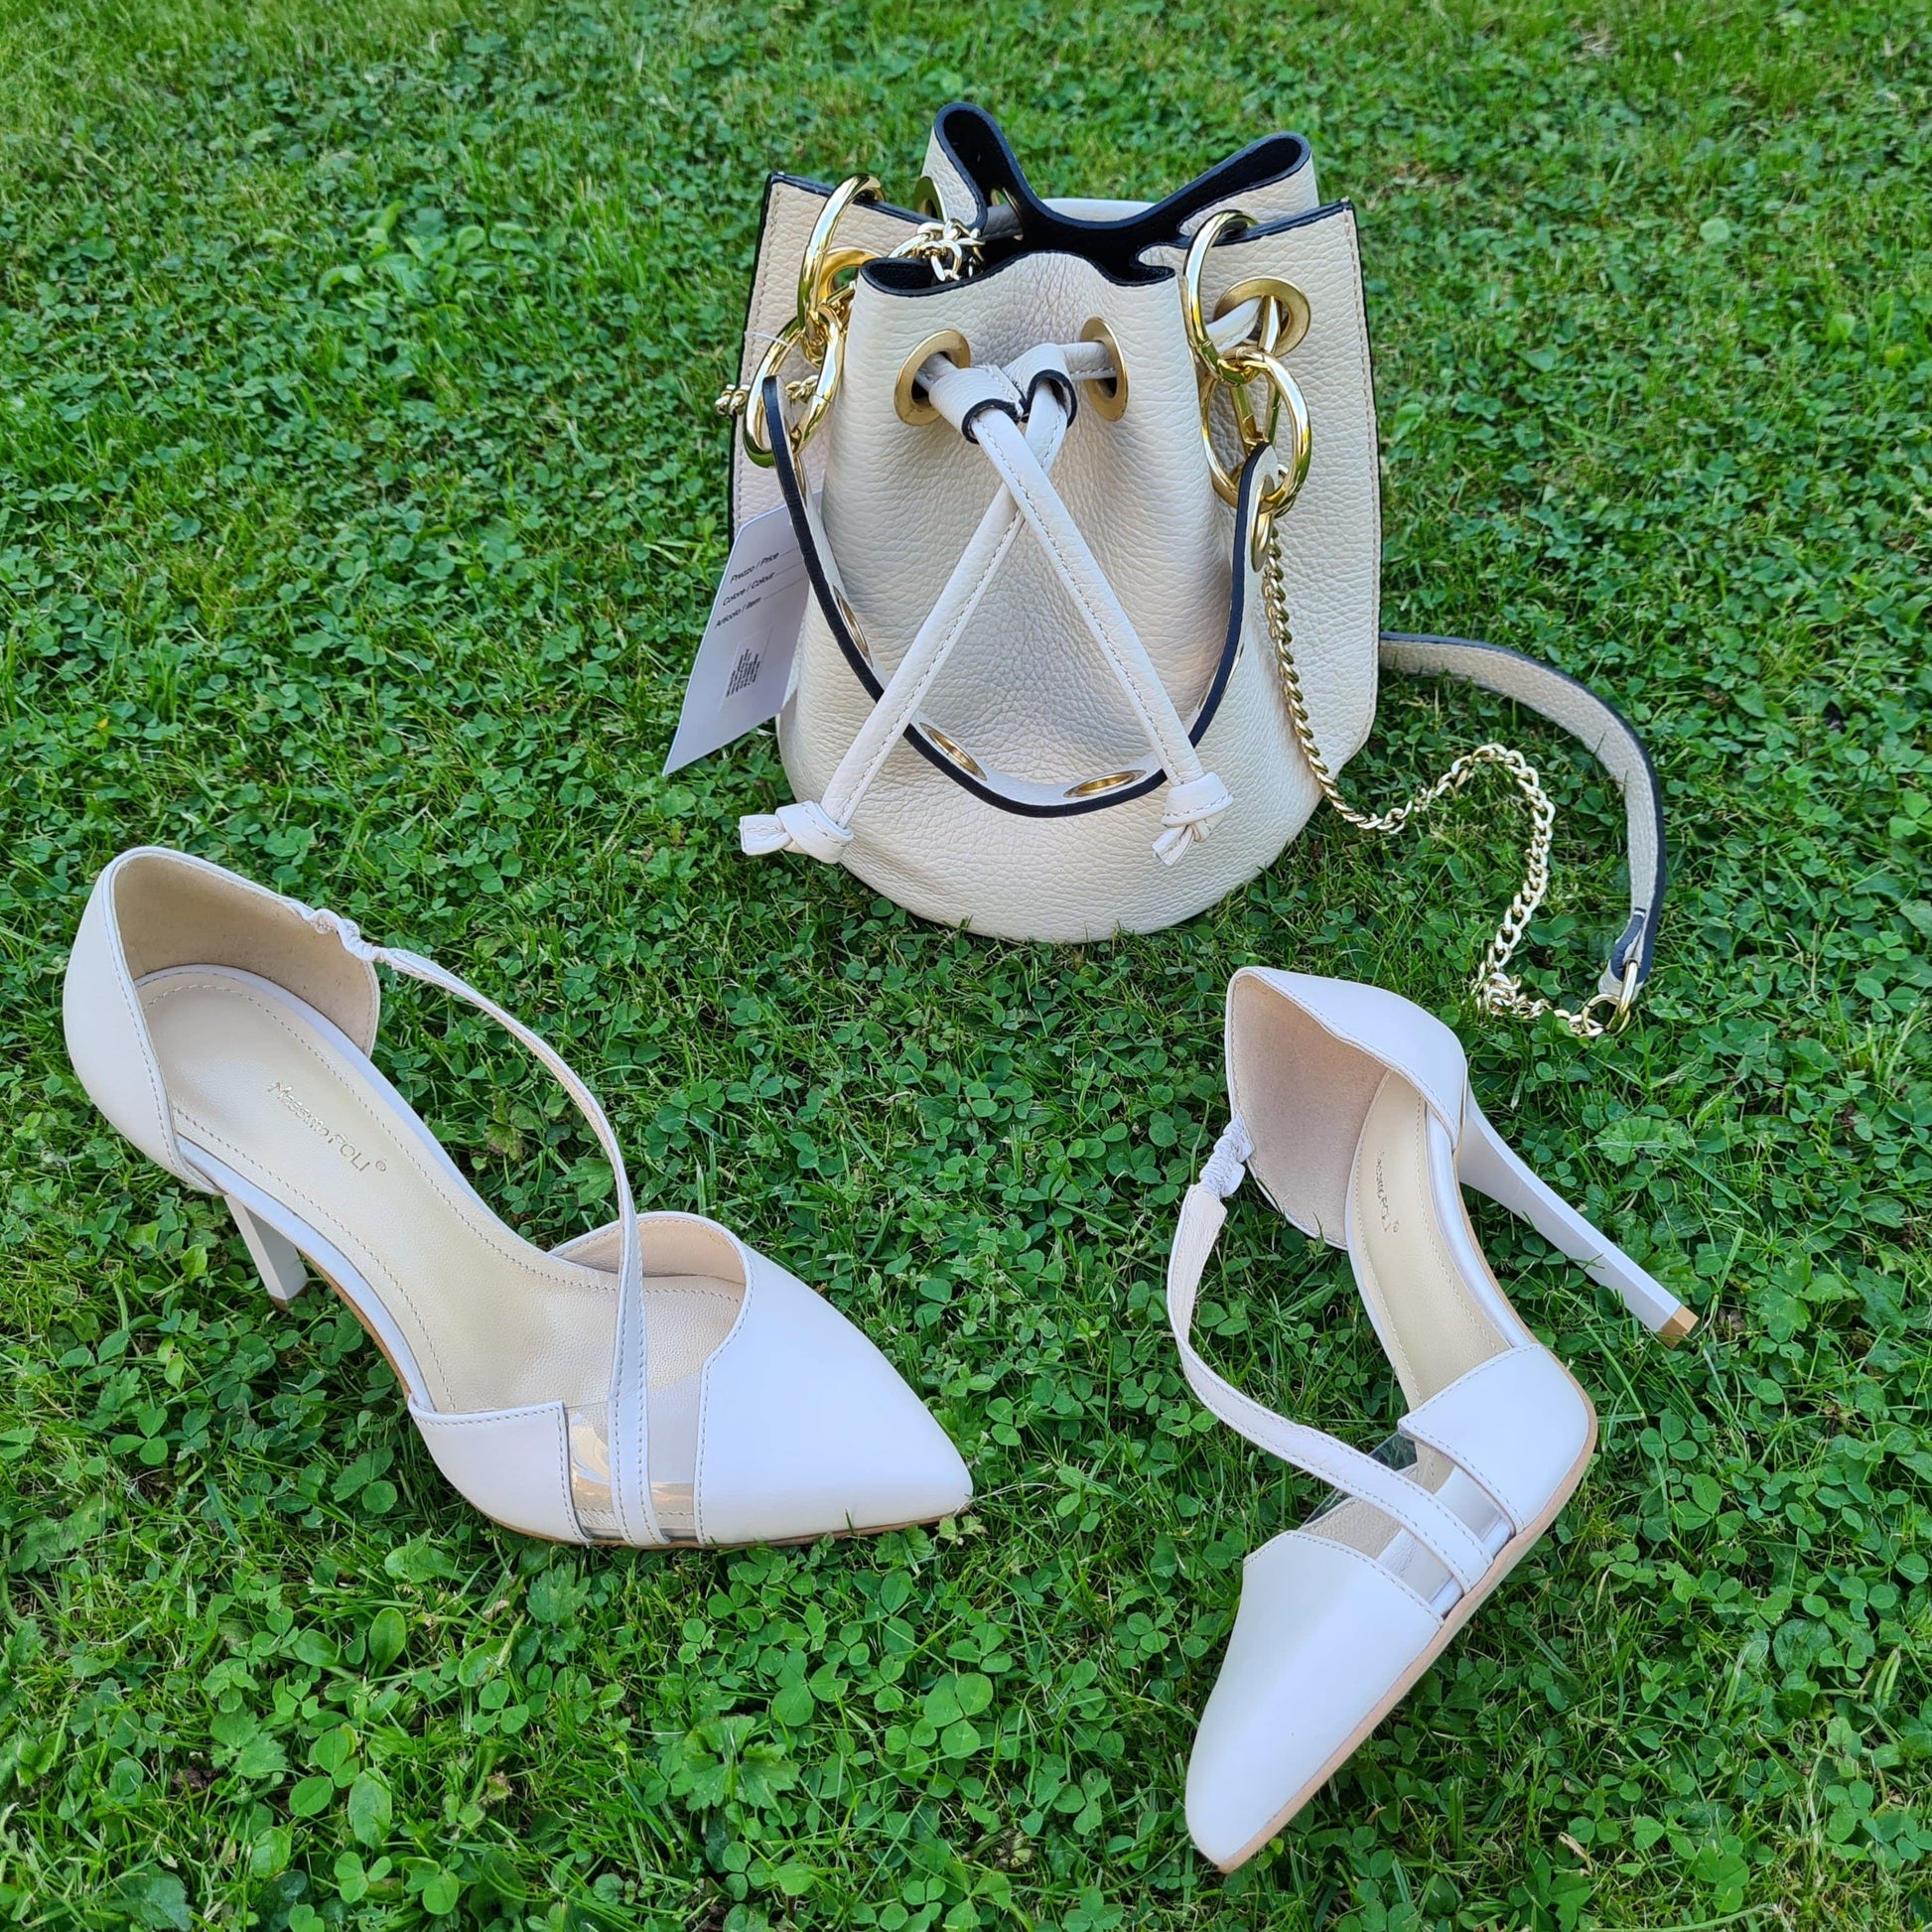 Nude leather bucket bag and a matching pair of nude leather court shoes